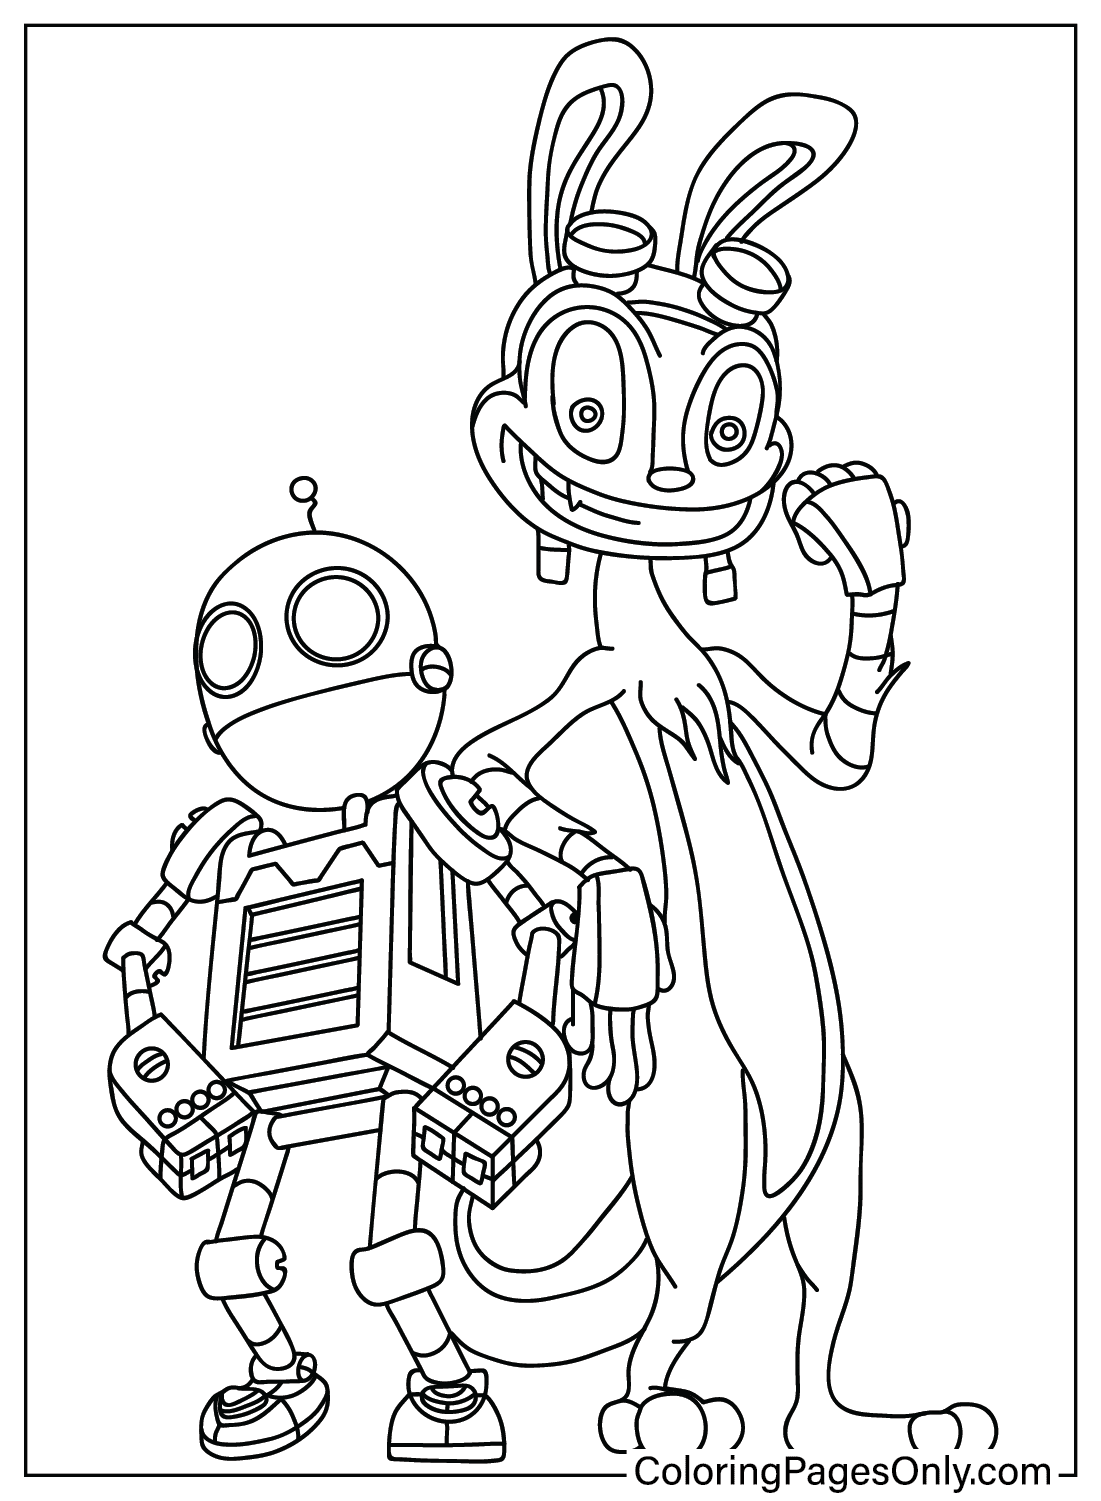 Robot and Daxter Coloring Page from Jak and Daxter